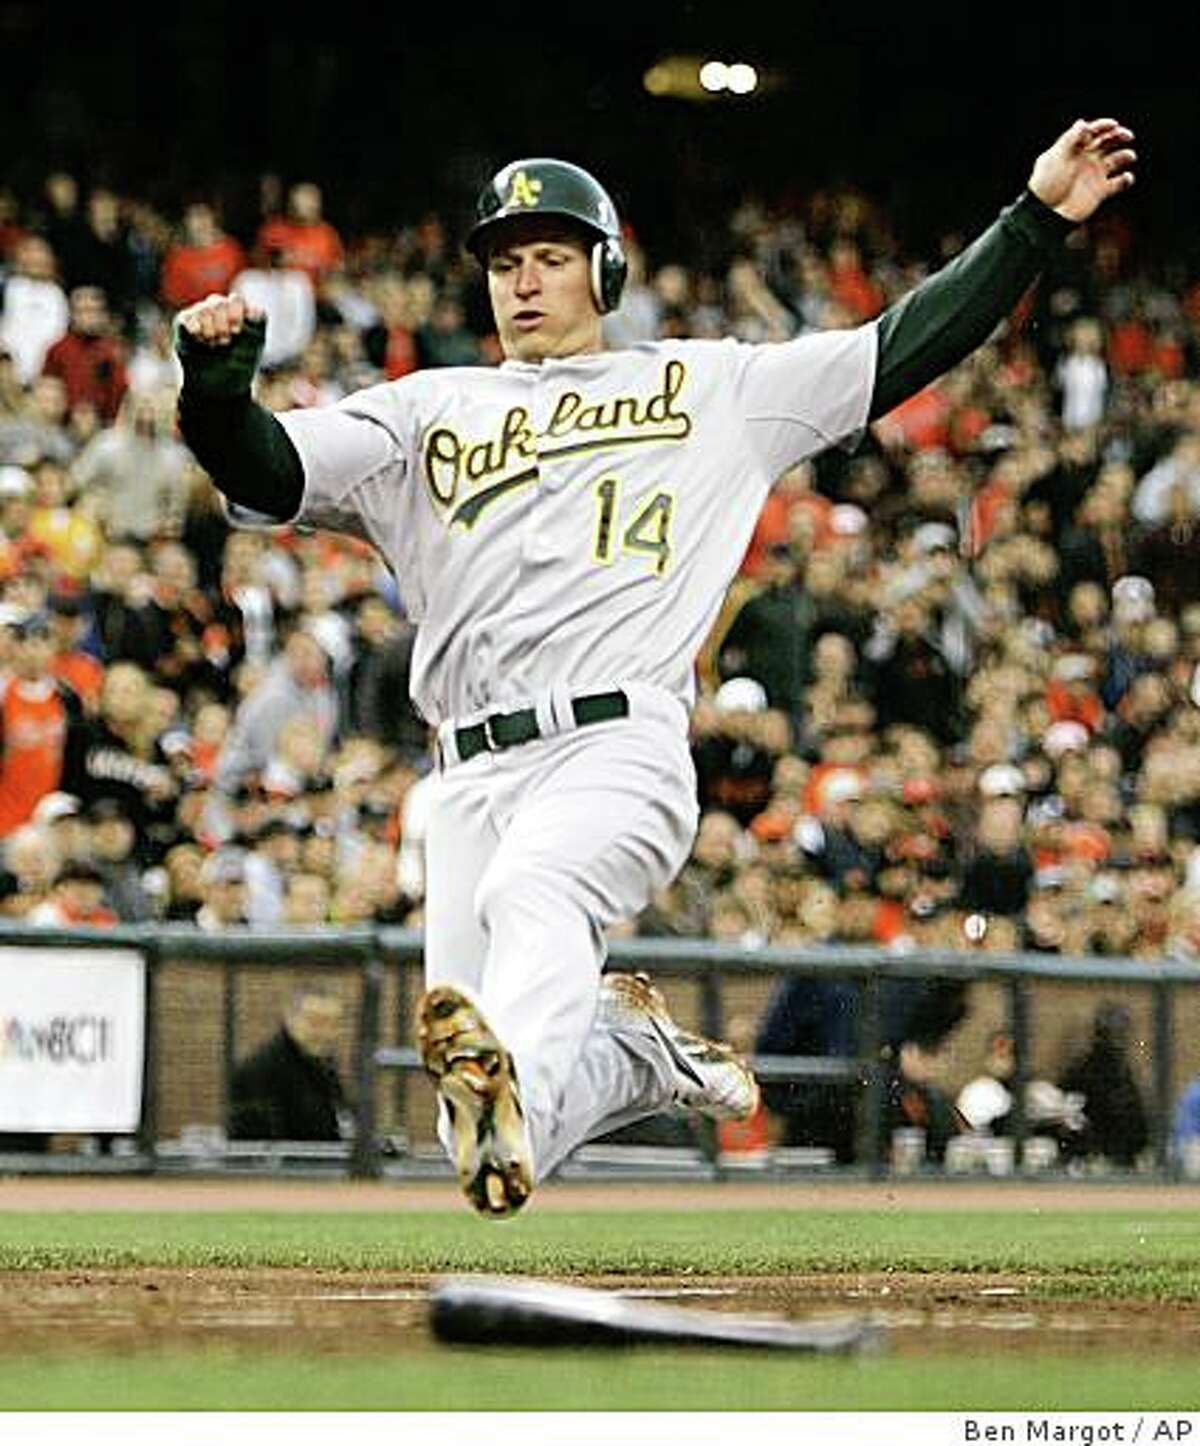 Oakland Athletics' Mark Ellis slides to score during the third inning of a baseball game against the San Francisco Giants Friday, June 13, 2008, in San Francisco. Ellis scored on a sacrifice fly by Jack Cust. (AP Photo/Ben Margot)